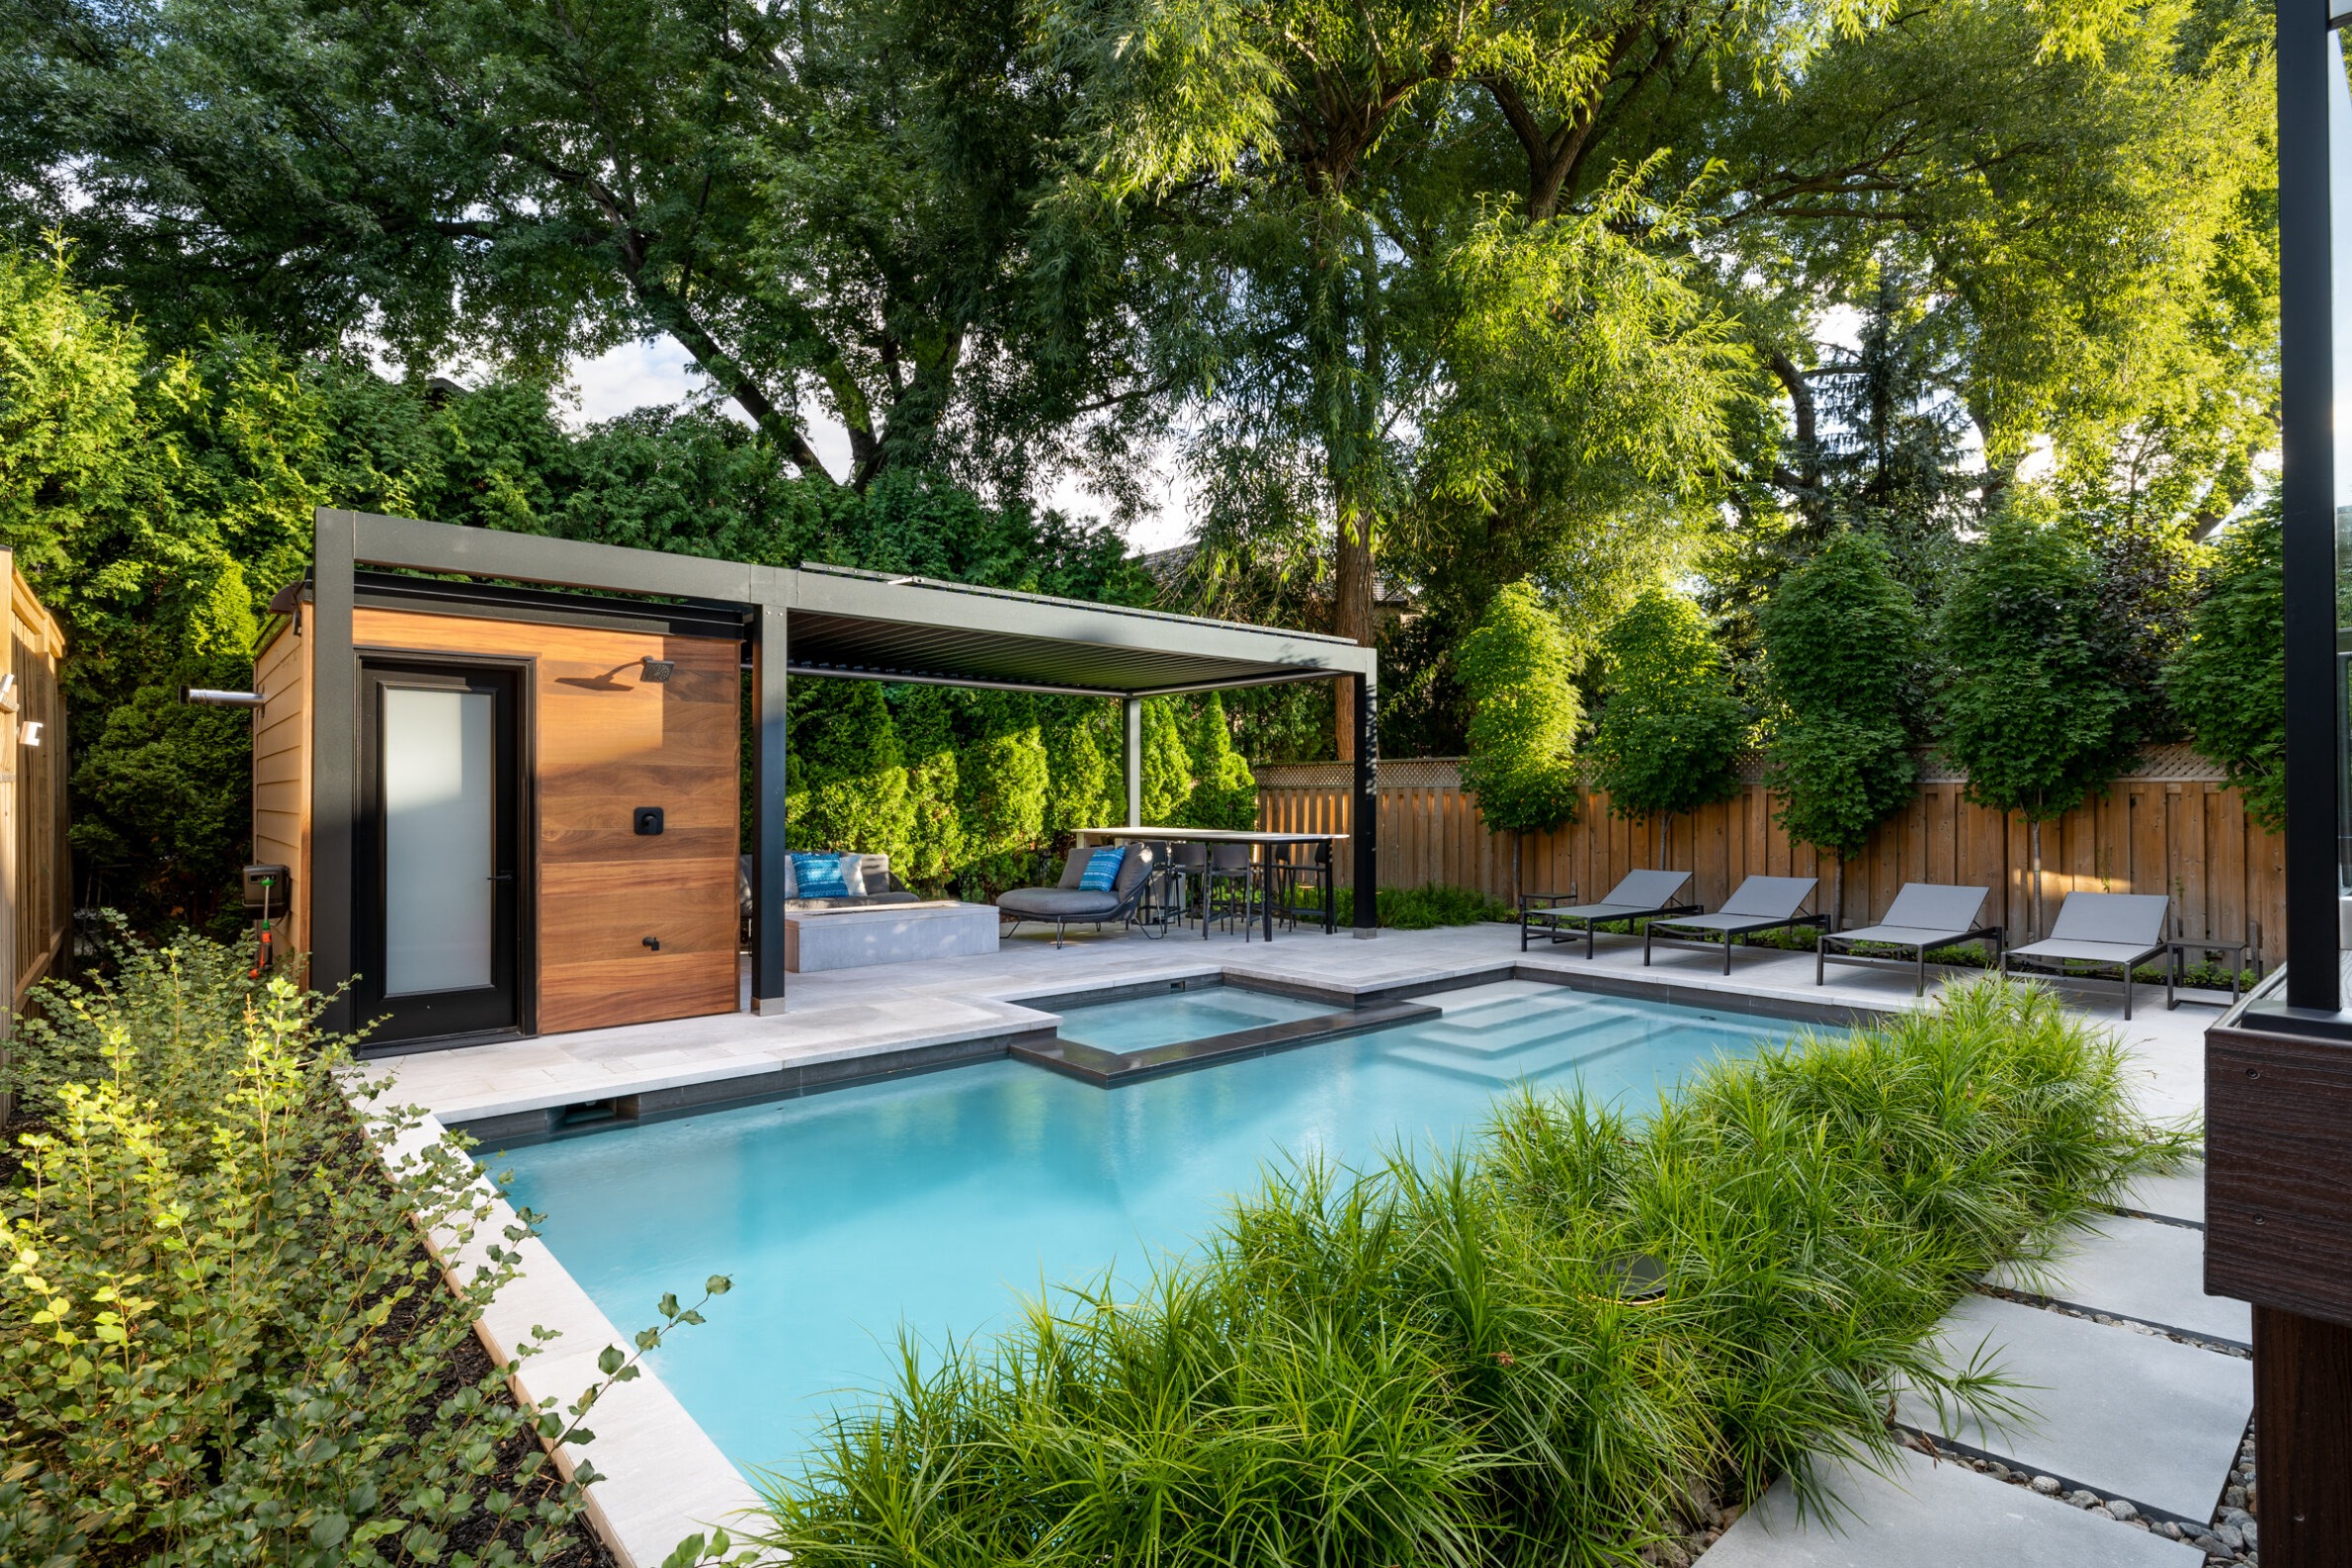 An inviting backyard with a rectangular swimming pool, modern pool house, loungers, green landscaping, and a pergola-covered seating area. Surrounded by a wooden fence.